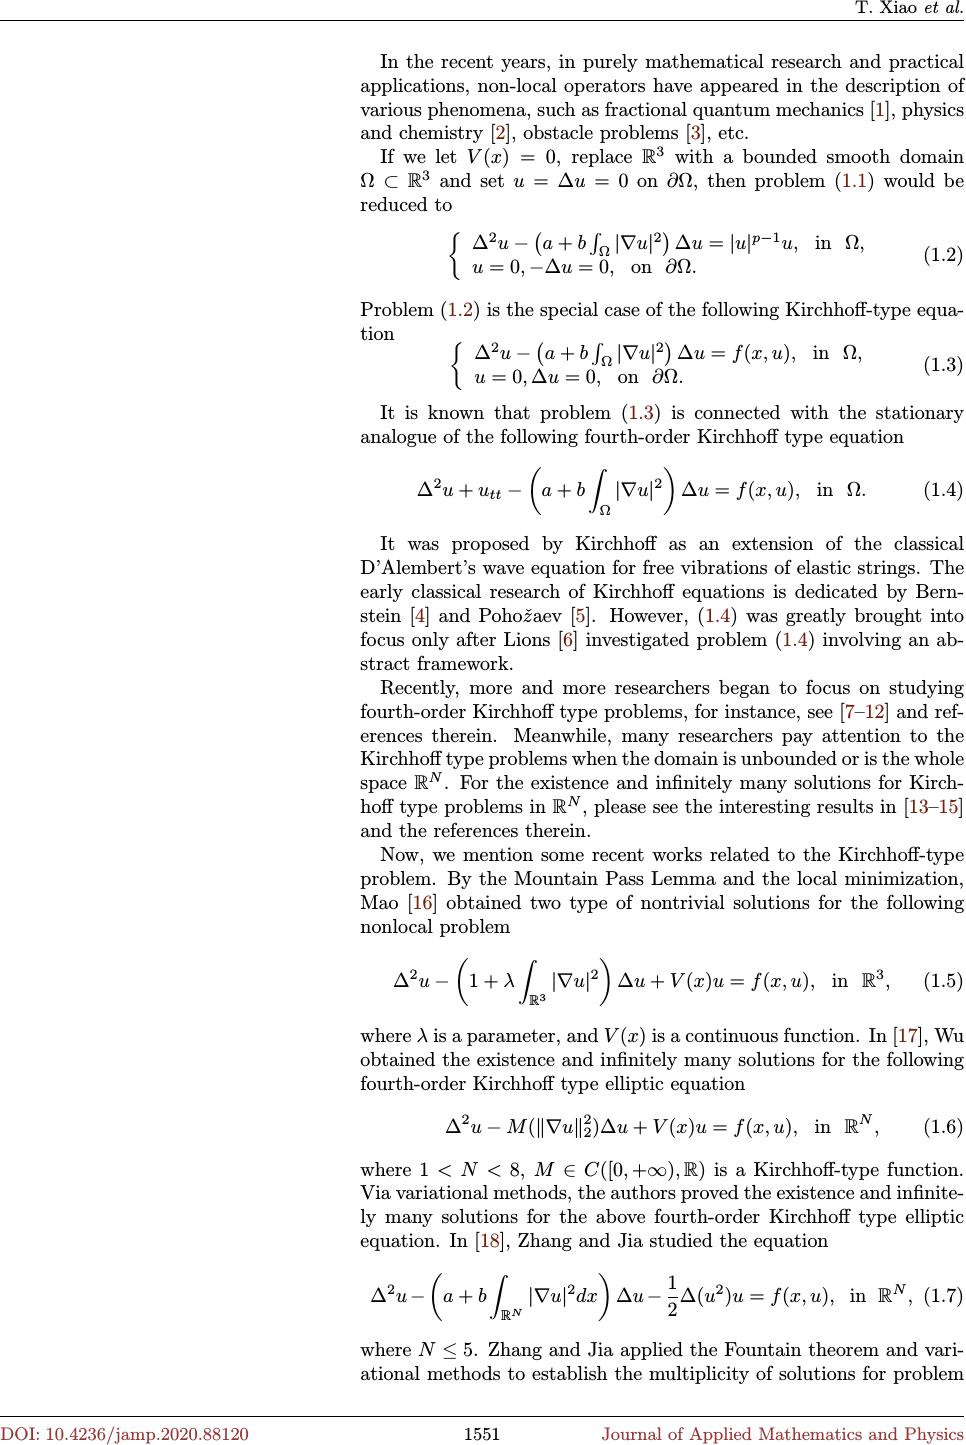 Existence Of Infinitely Many High Energy Solutions For A Fourth Order Kirchhoff Type Elliptic Equation In R Sup 3 Sup